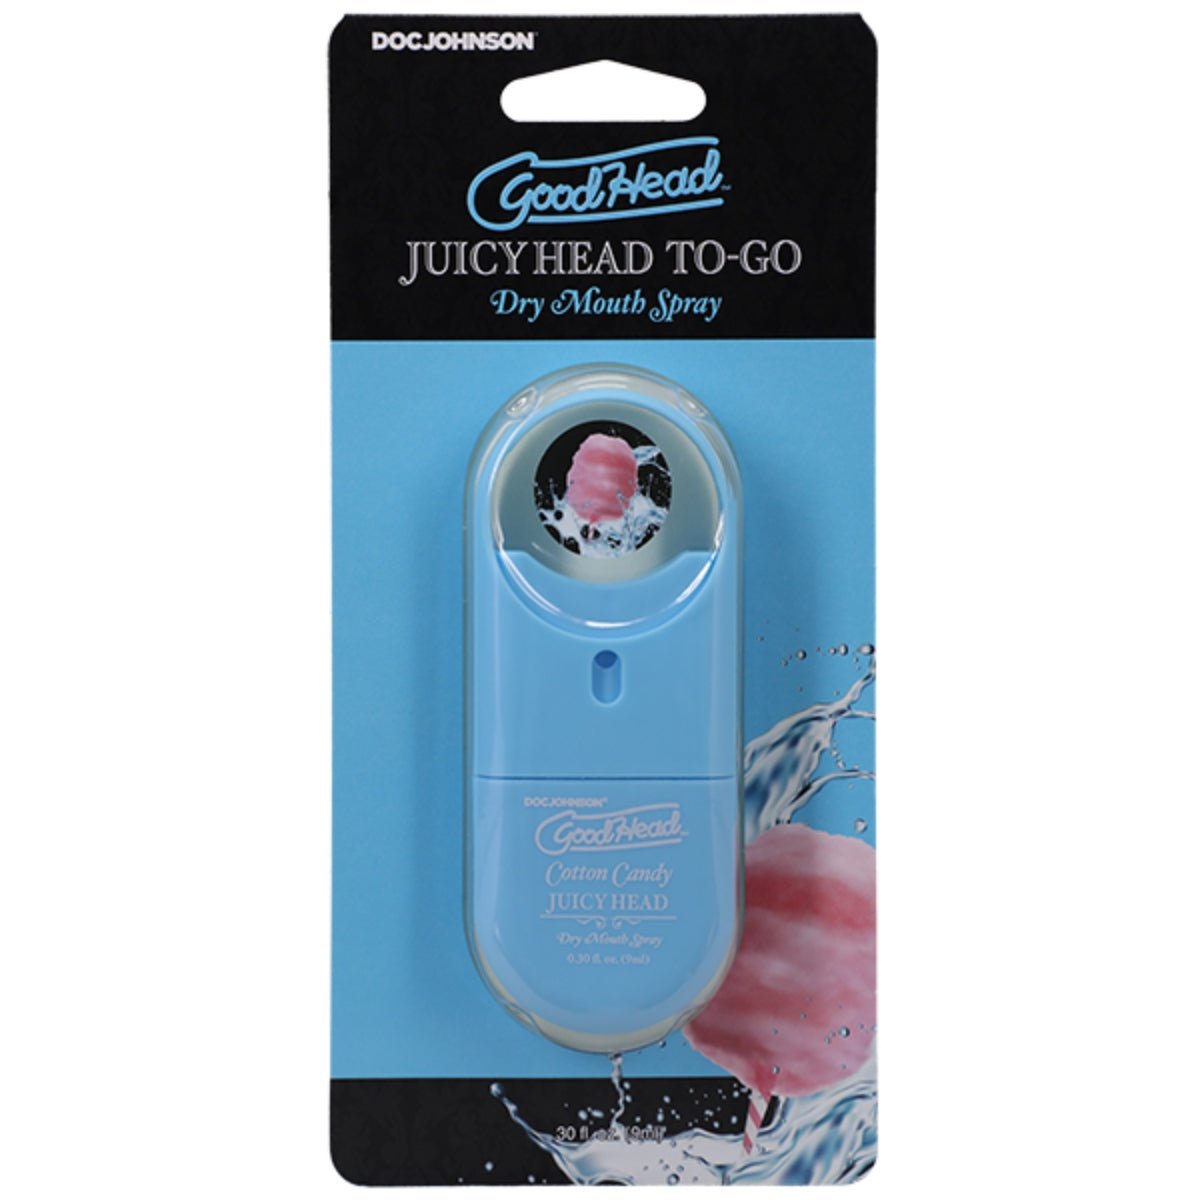 Flavoured Lube Goodhead Juicy Head Dry Mouth Spray To-Go Cotton Candy 30 fl oz   